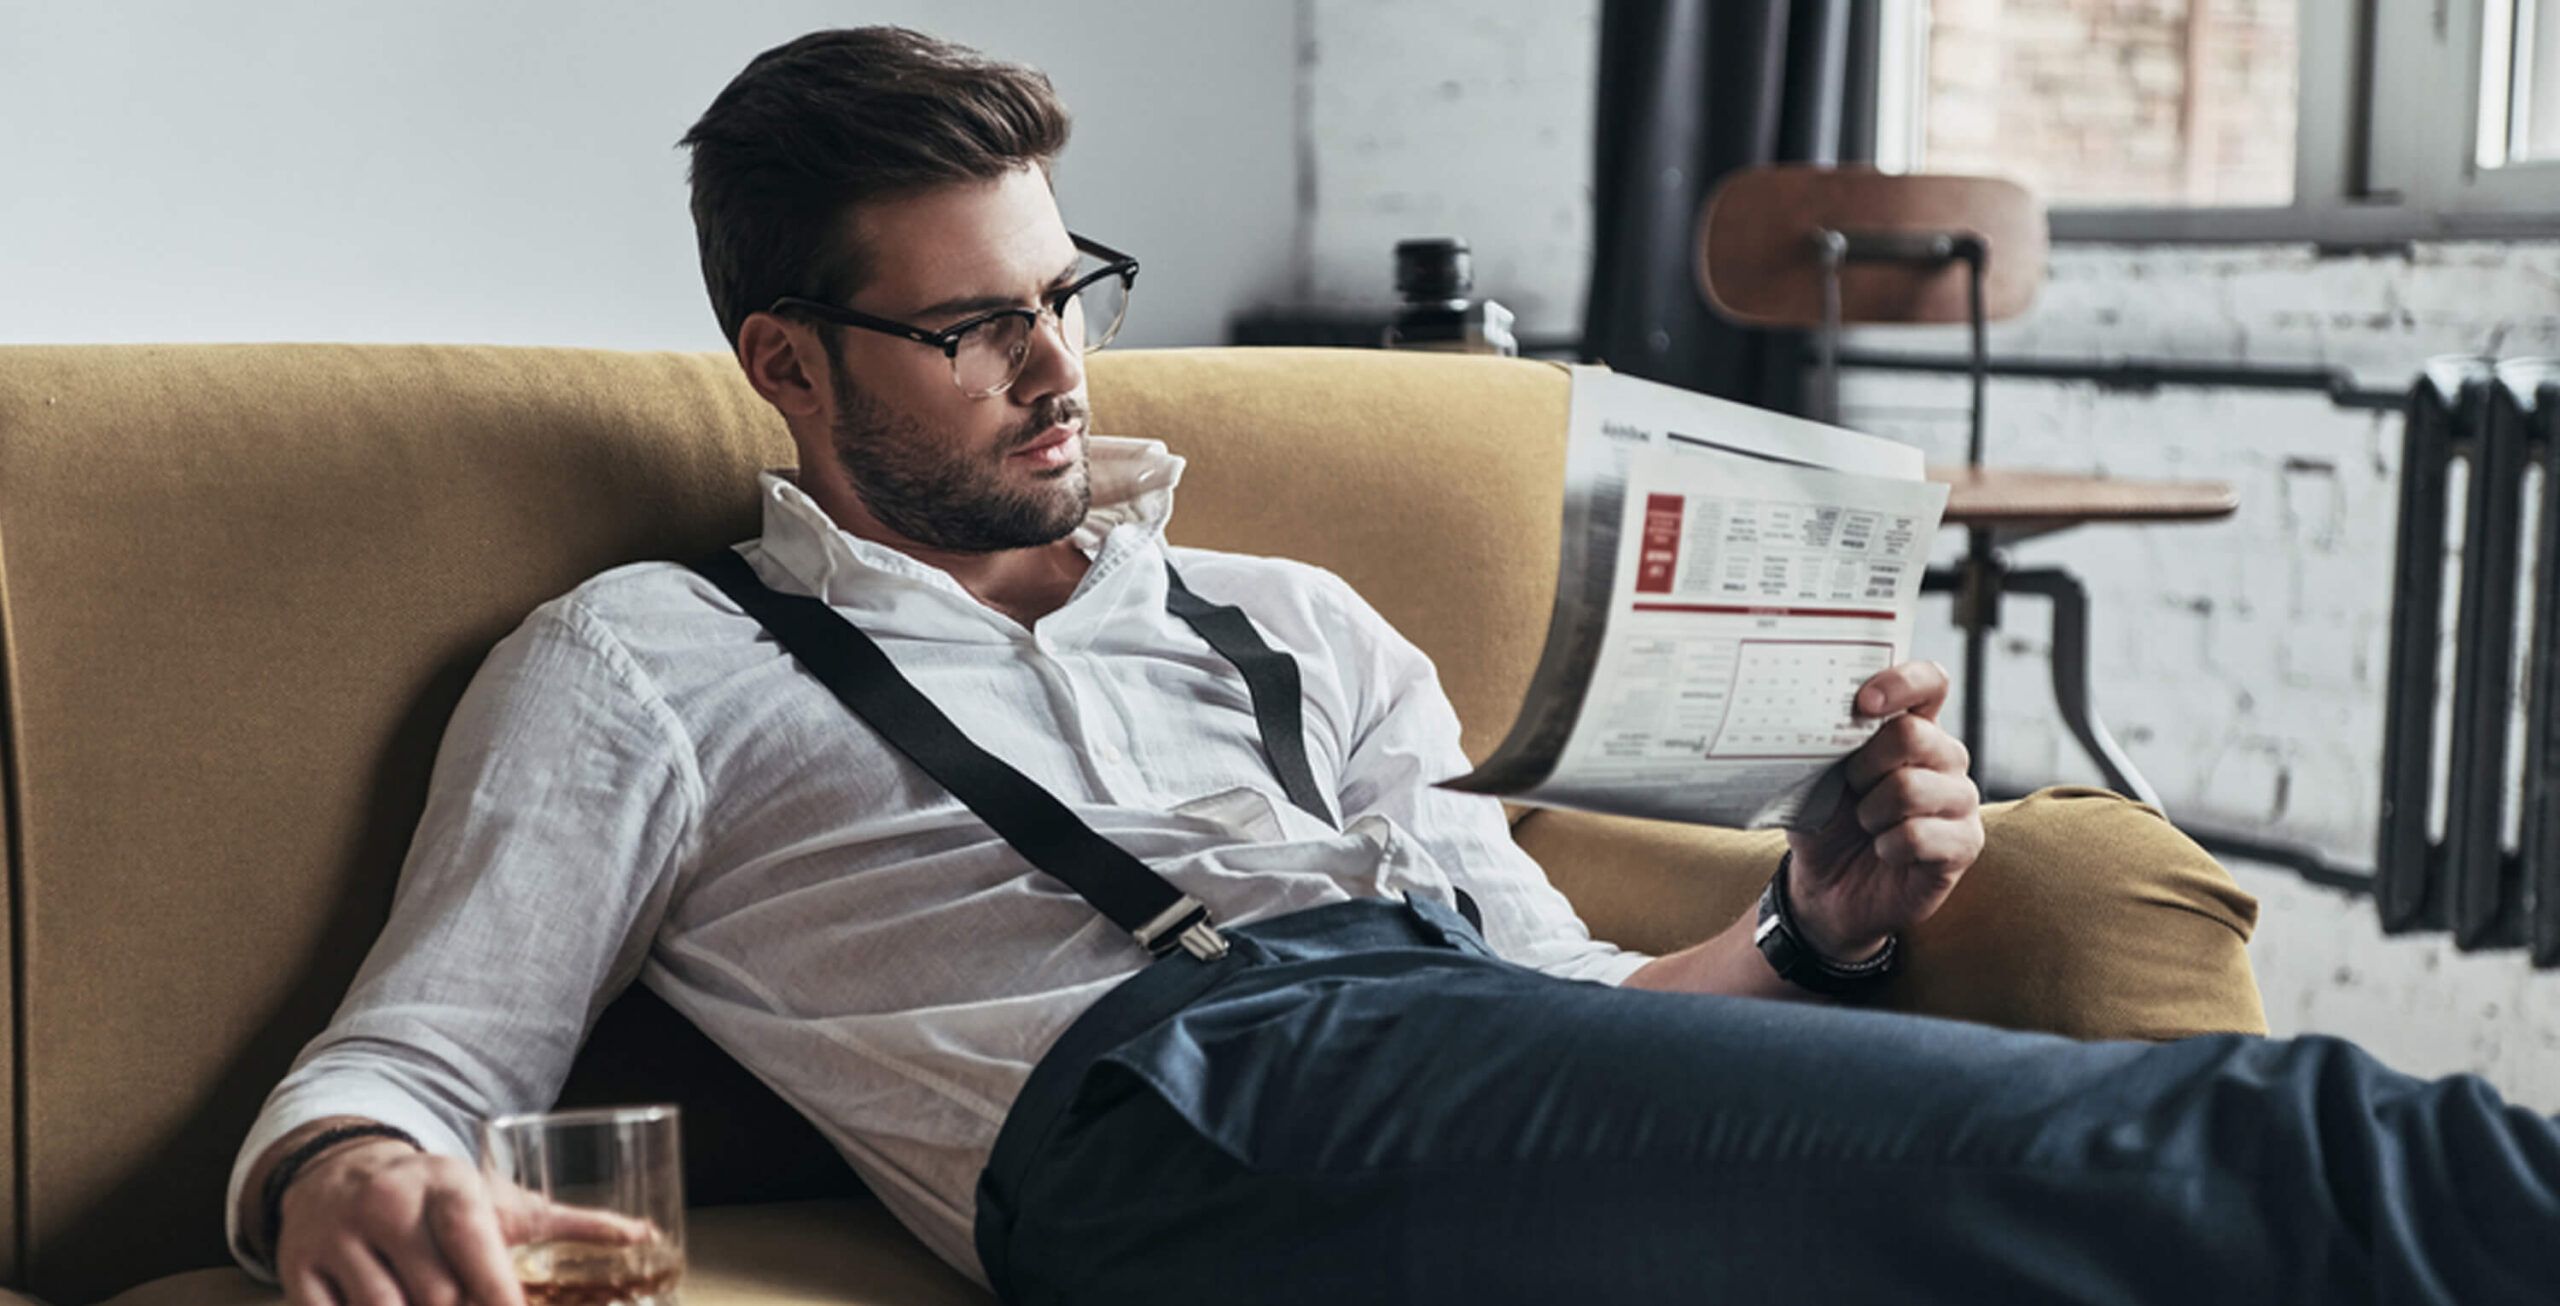 11 of the Most Interesting Facts about Men